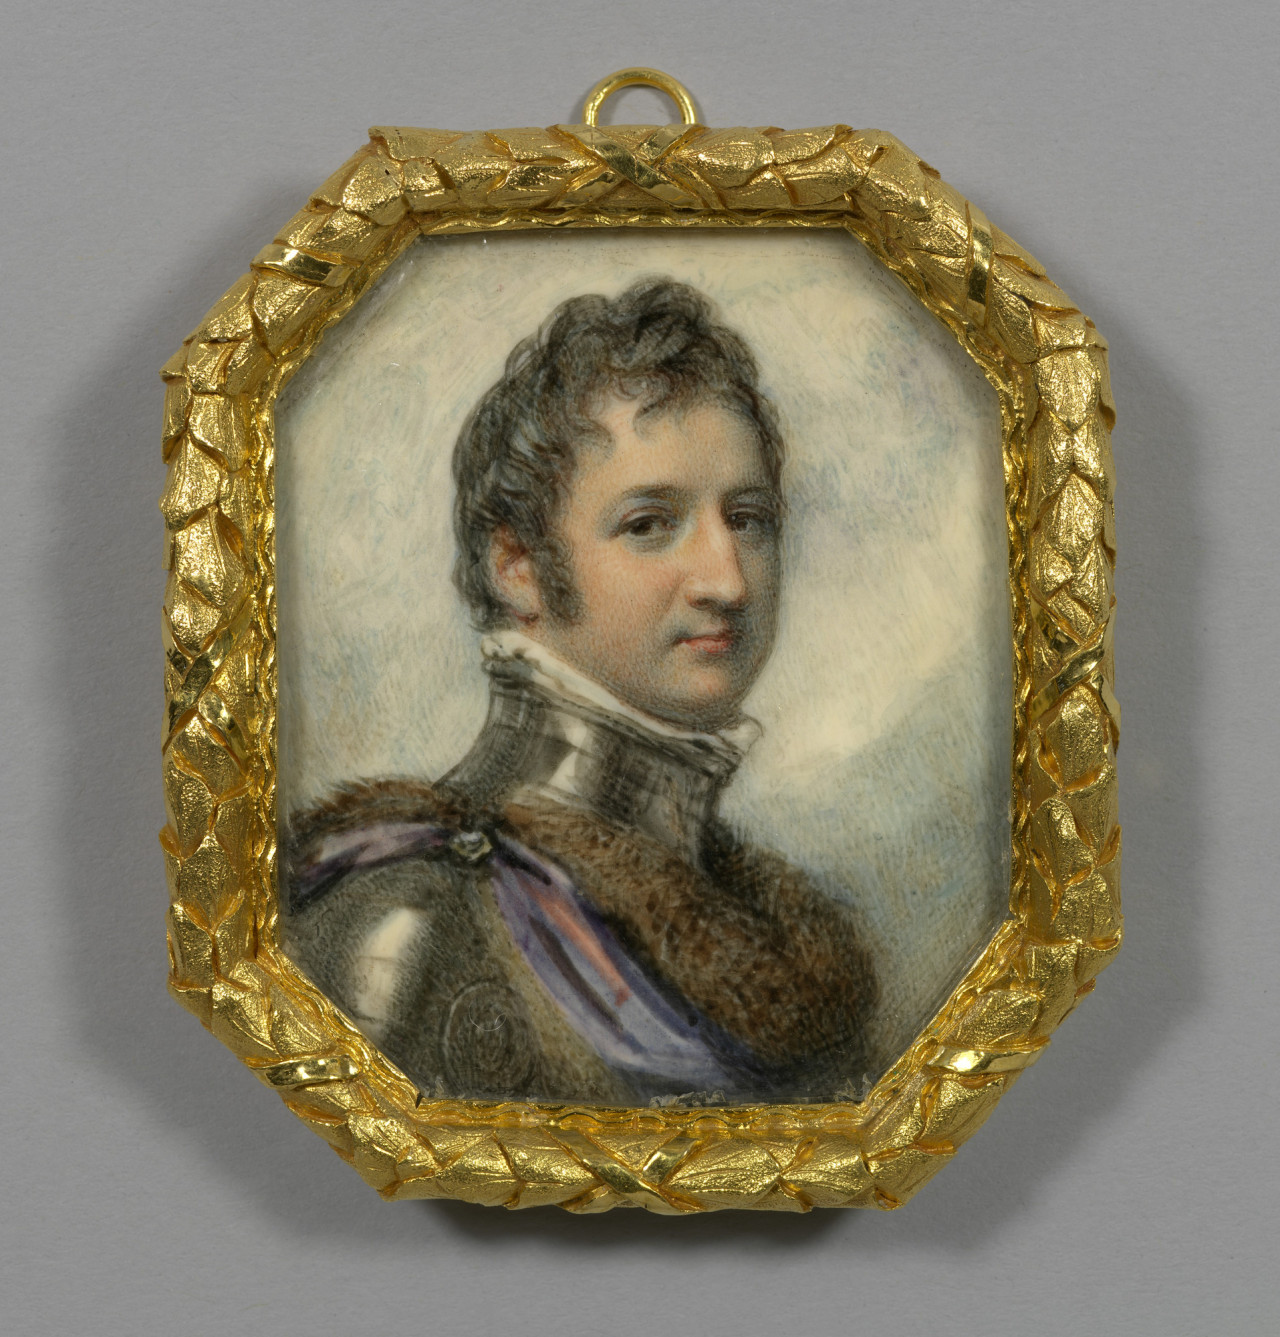 Duke of Orleans, later King Louis Philippe of... - Long Live Royalty